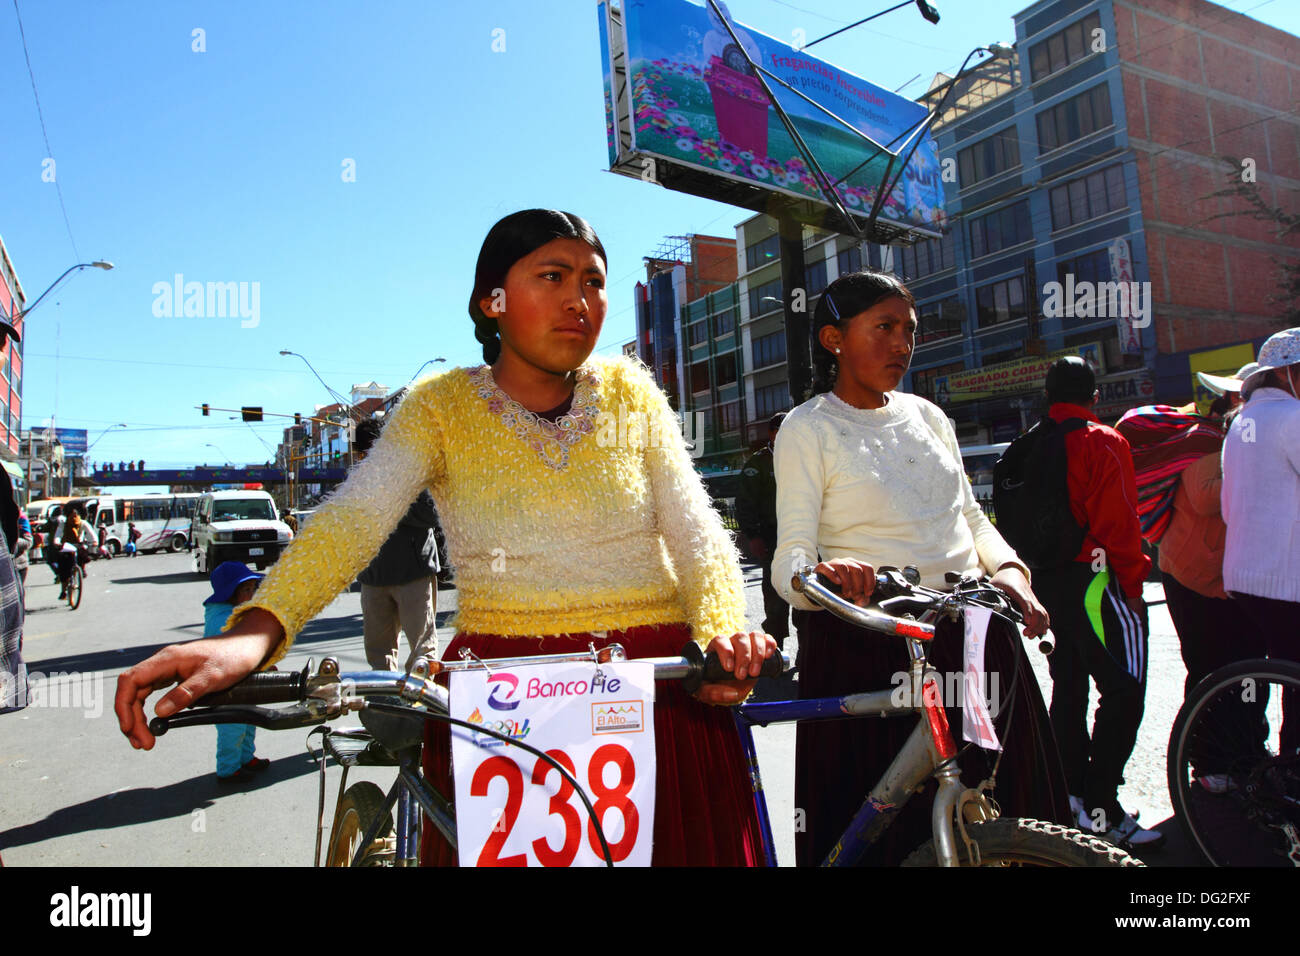 El Alto, Bolivia. 12th Oct, 2013.  Competitors line up before the start of a Cholitas Bicycle Race for indigenous Aymara women. The race is held at an altitude of just over 4,000m along main roads in the city of El Alto (above the capital, La Paz) for Bolivian Womens Day, which was yesterday Friday October 11th. Credit:  James Brunker / Alamy Live News Stock Photo